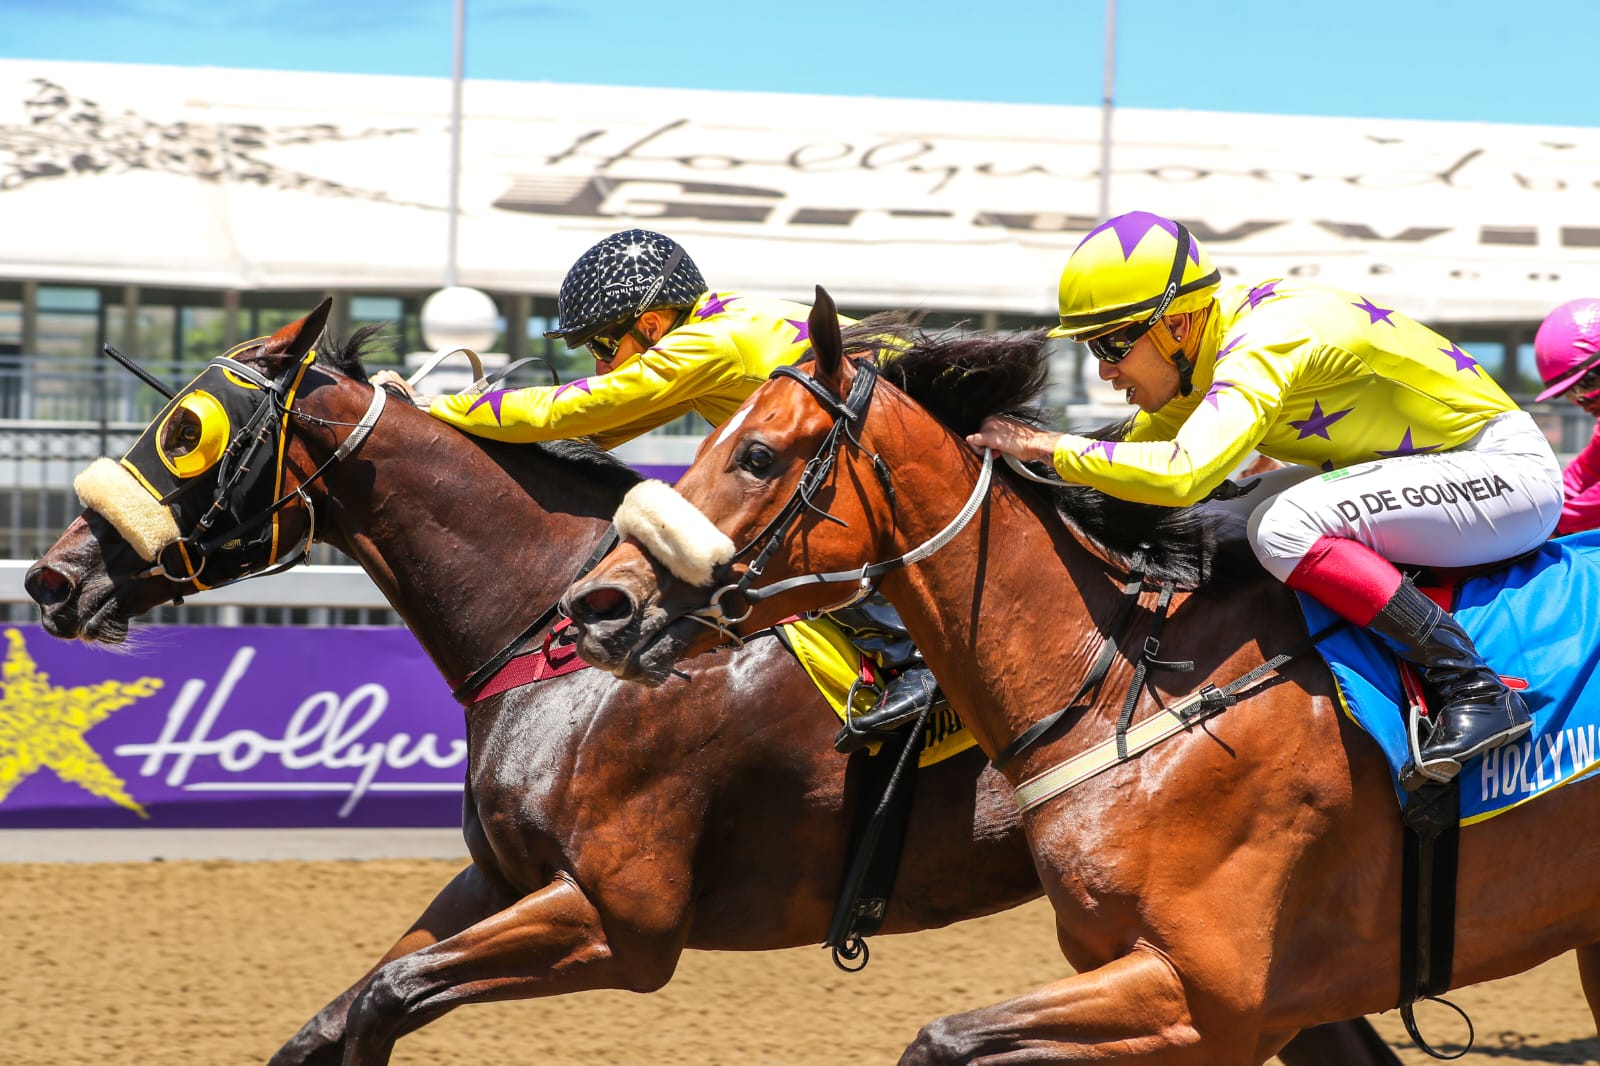 20220207 - Protea Pride wins at Hollywoodbets Greyville, followed by Purple Operator.